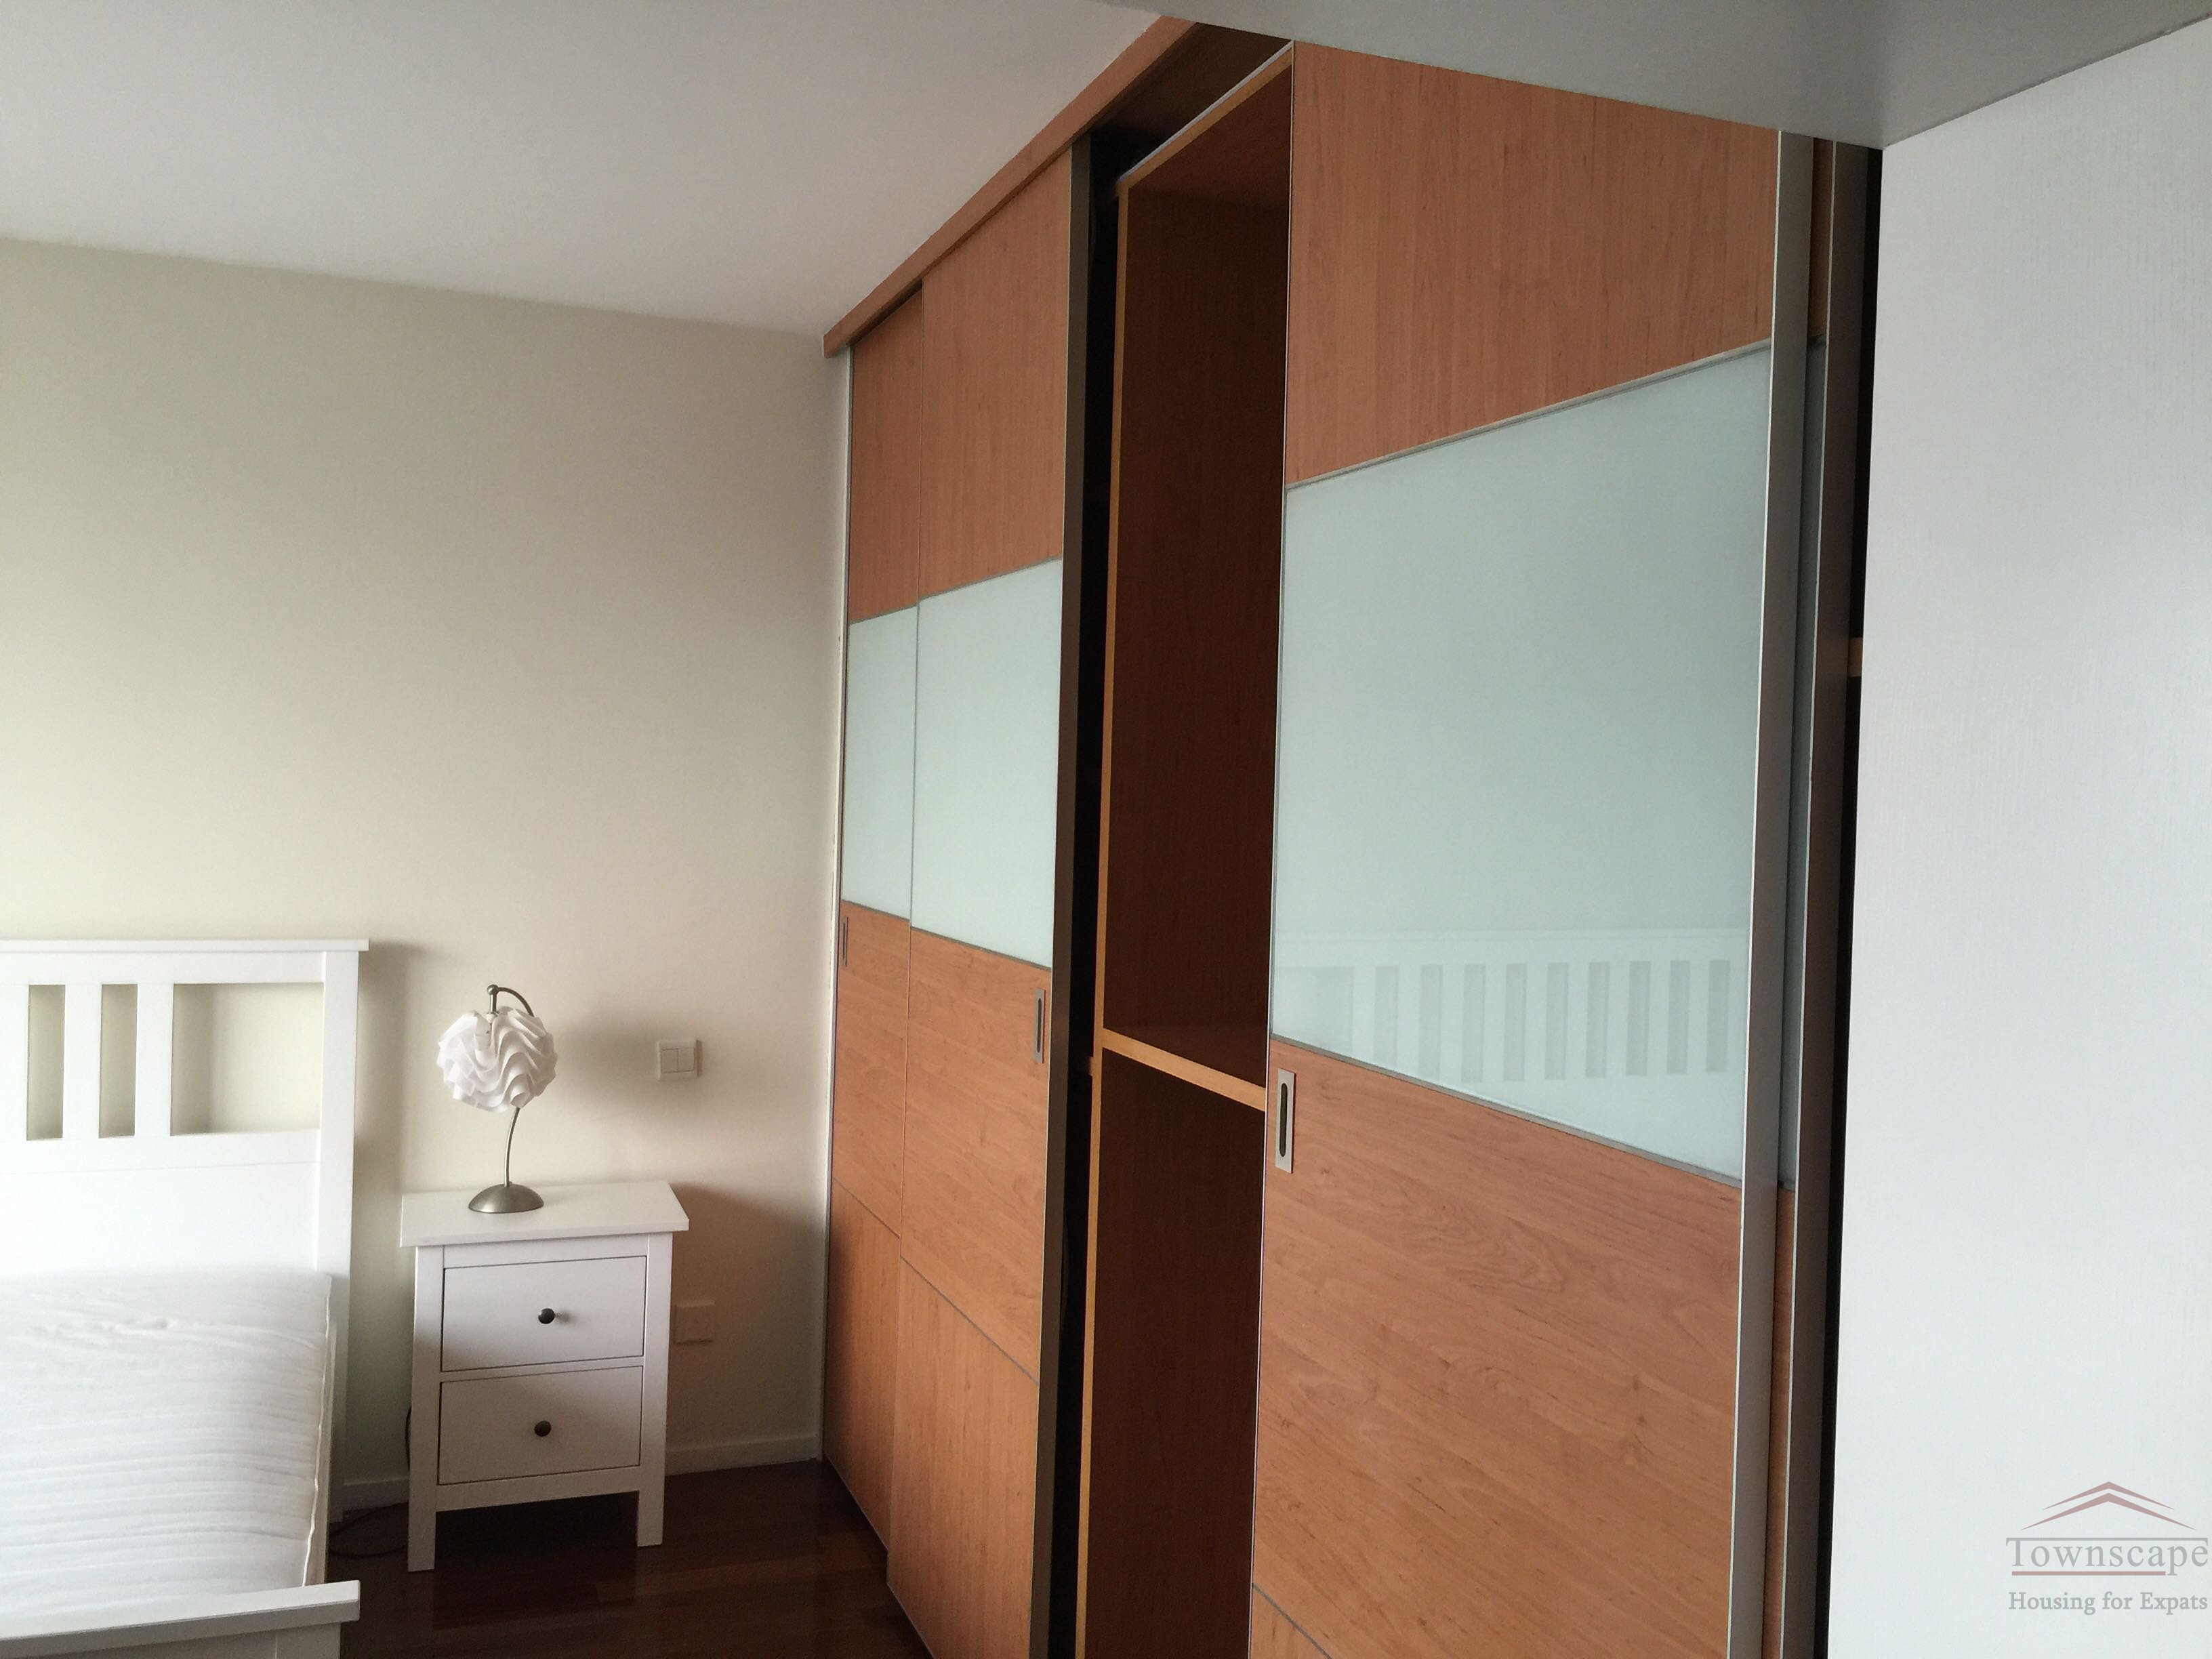 shanghai 2br apartment for rent Spacious, modern 2BR Apartment with balcony on Huashan Road